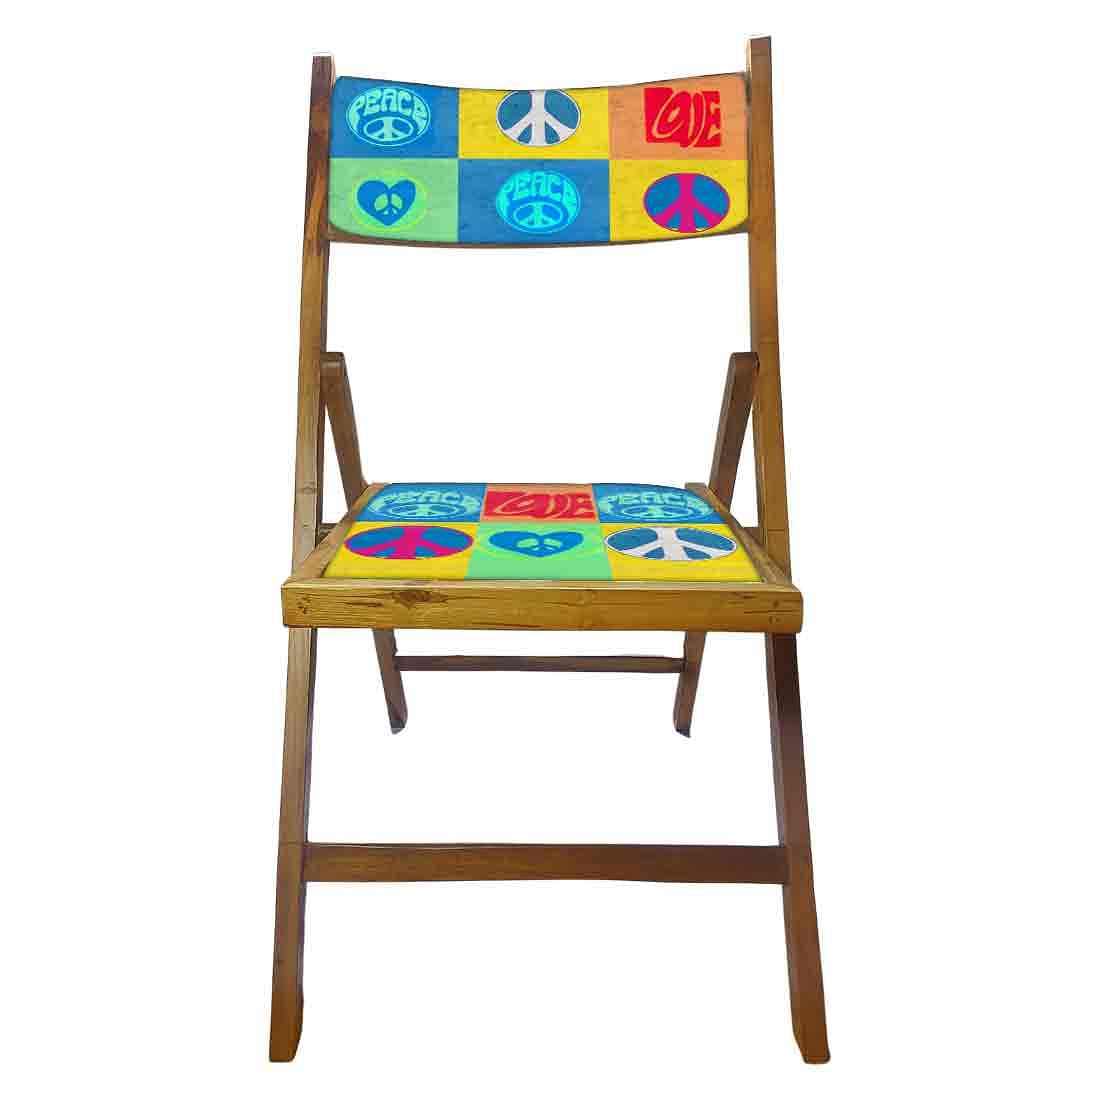 Nutcase Wooden Chairs With Cushion Seat For Home  -  Peace Nutcase